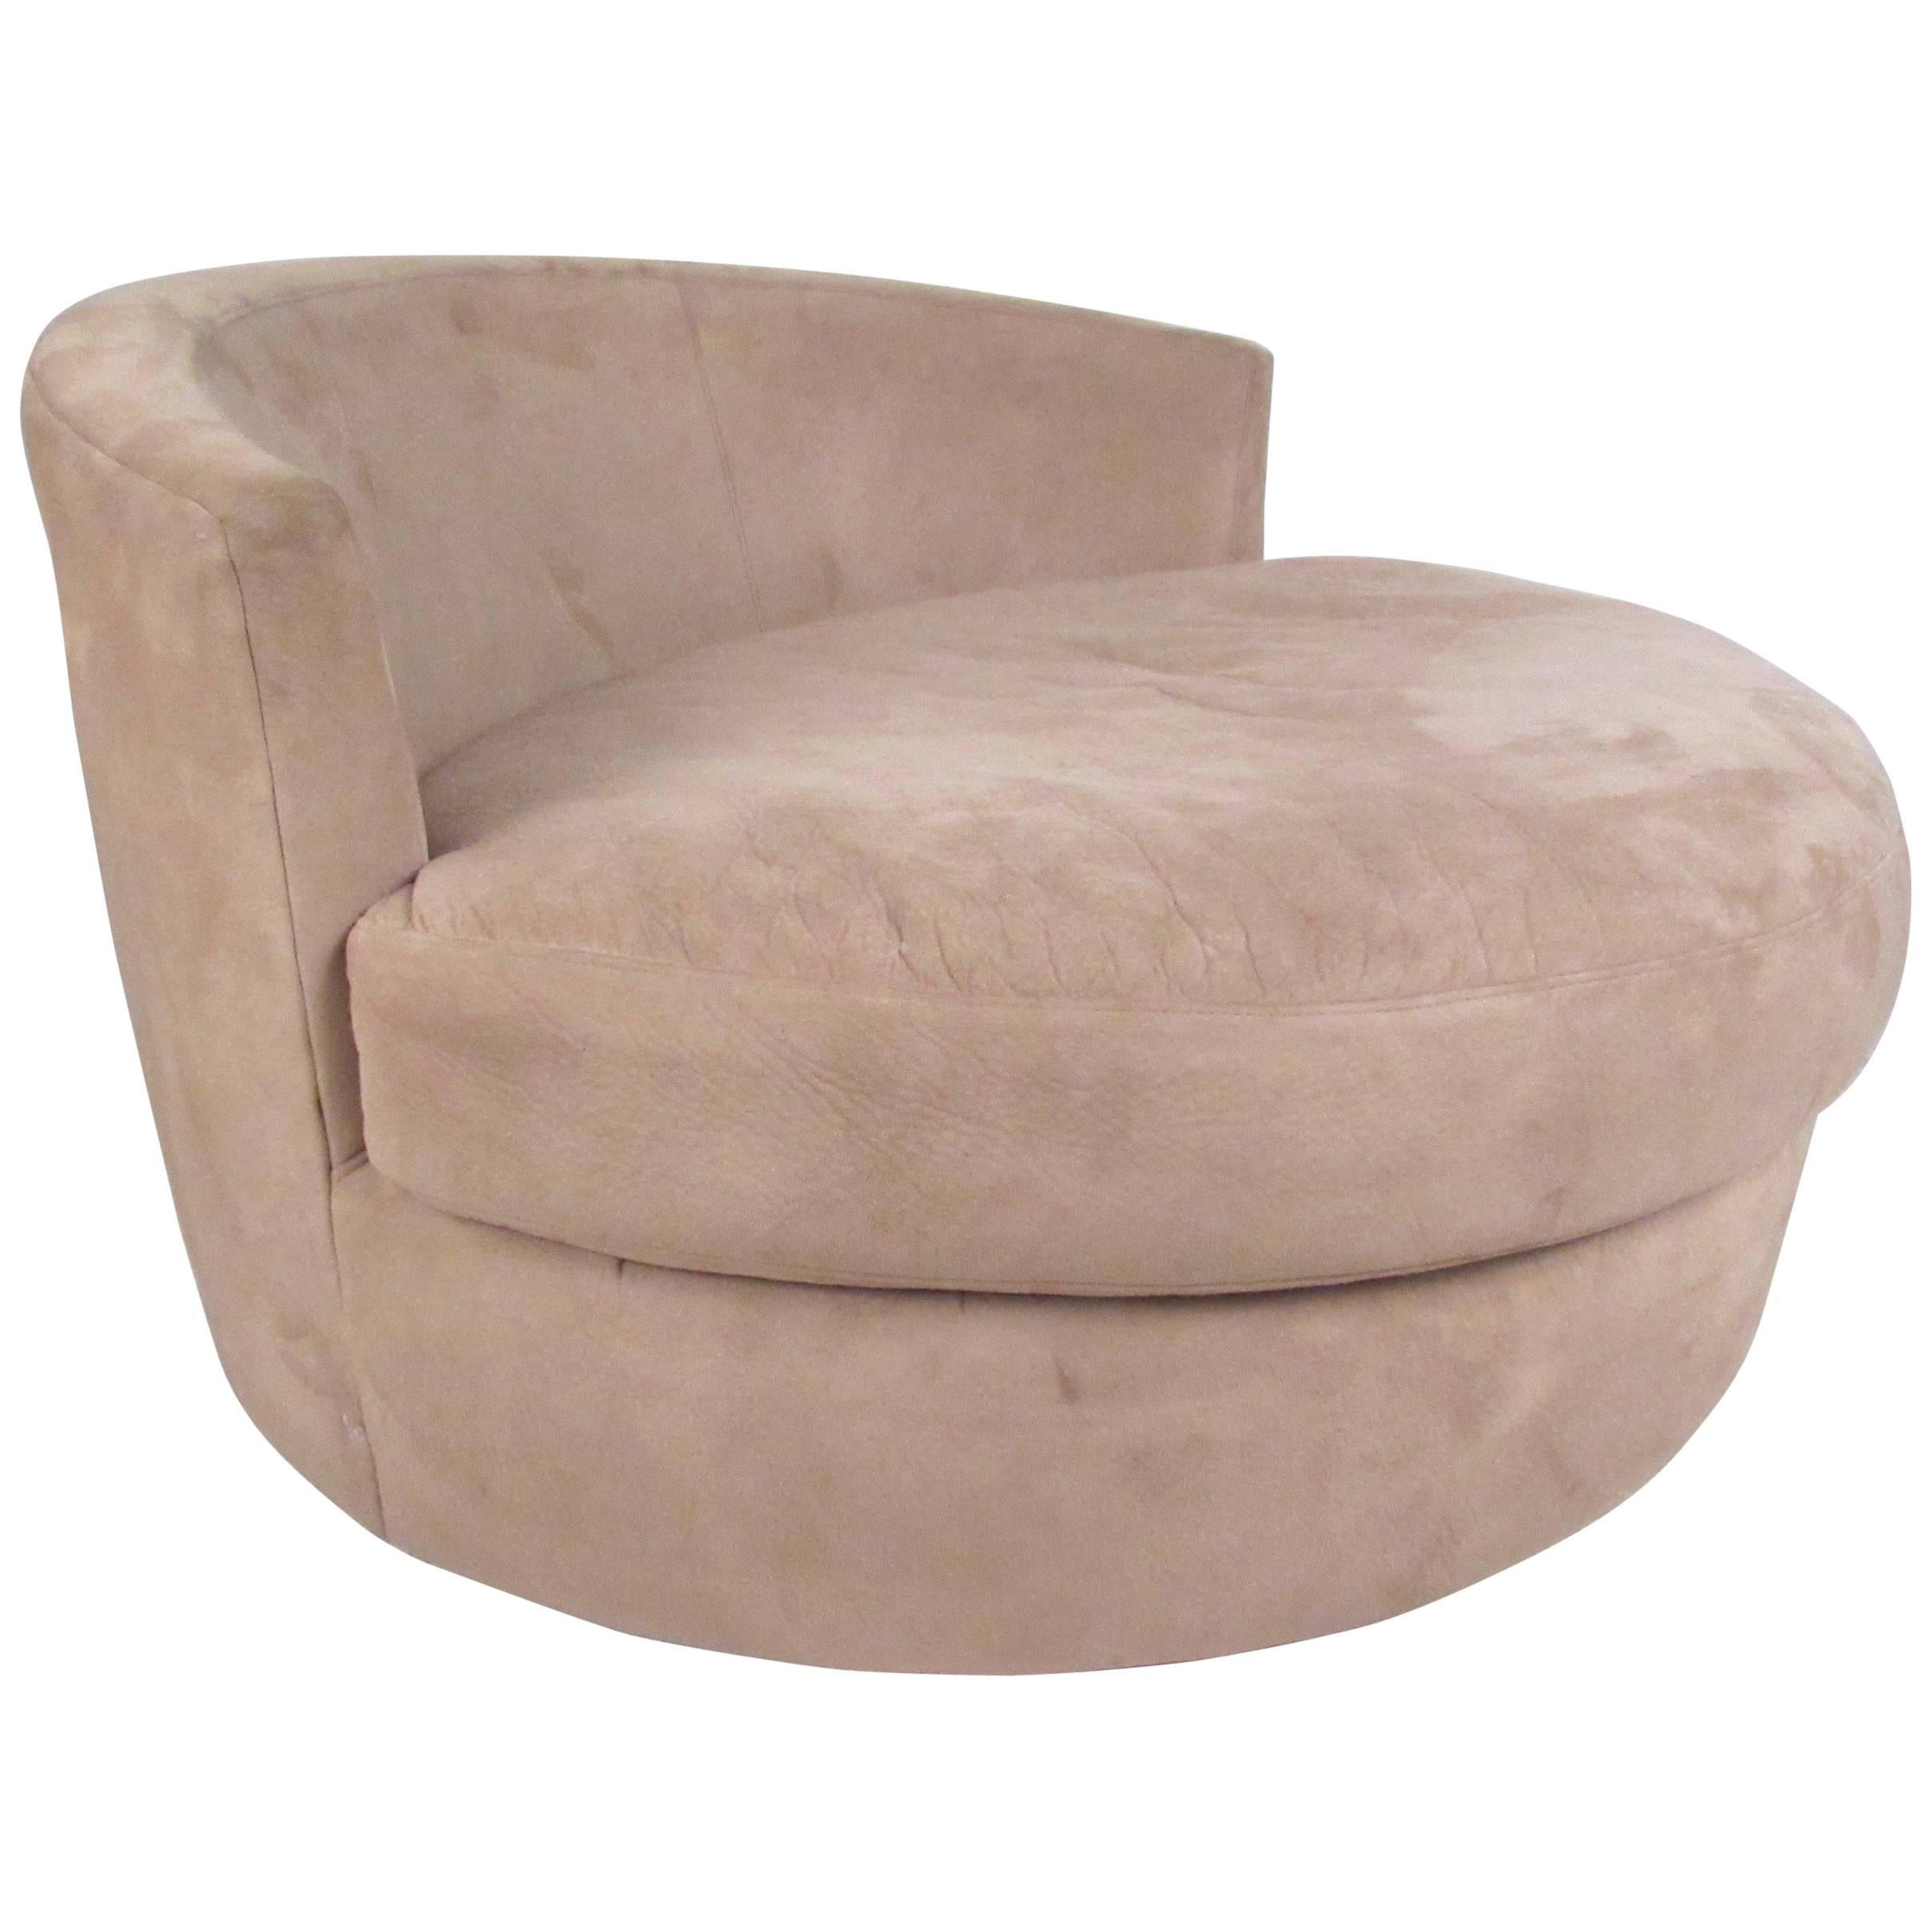 Stylish Modern Swivel Lounge Chair after Adrian Pearsall